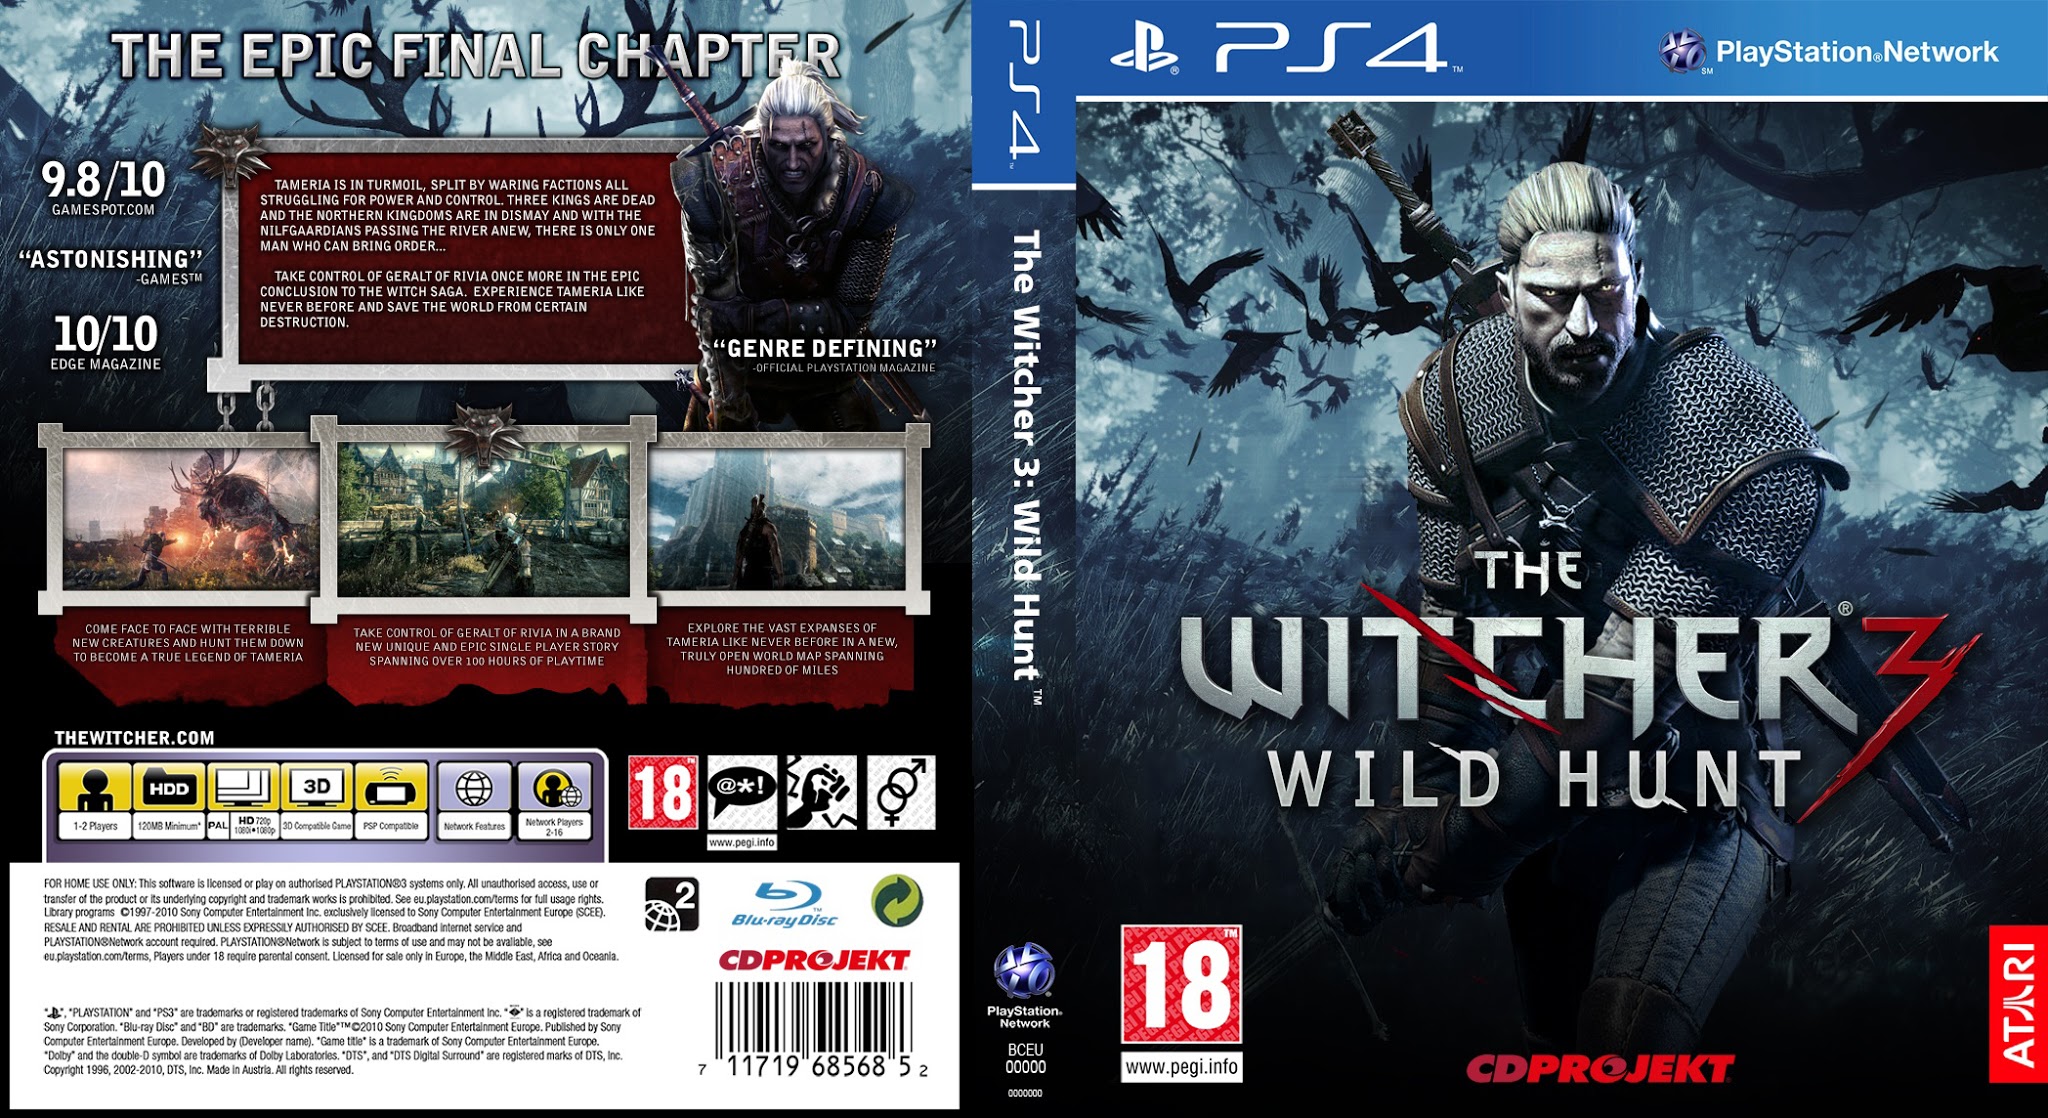 Epic final. Ведьмак 3 диск ps4. Диск (the Witcher 3 Wild Hunt) для ps4. Диск ПС 4 the Witcher 3 d. Ведьмак 3 Дикая охота ps3.